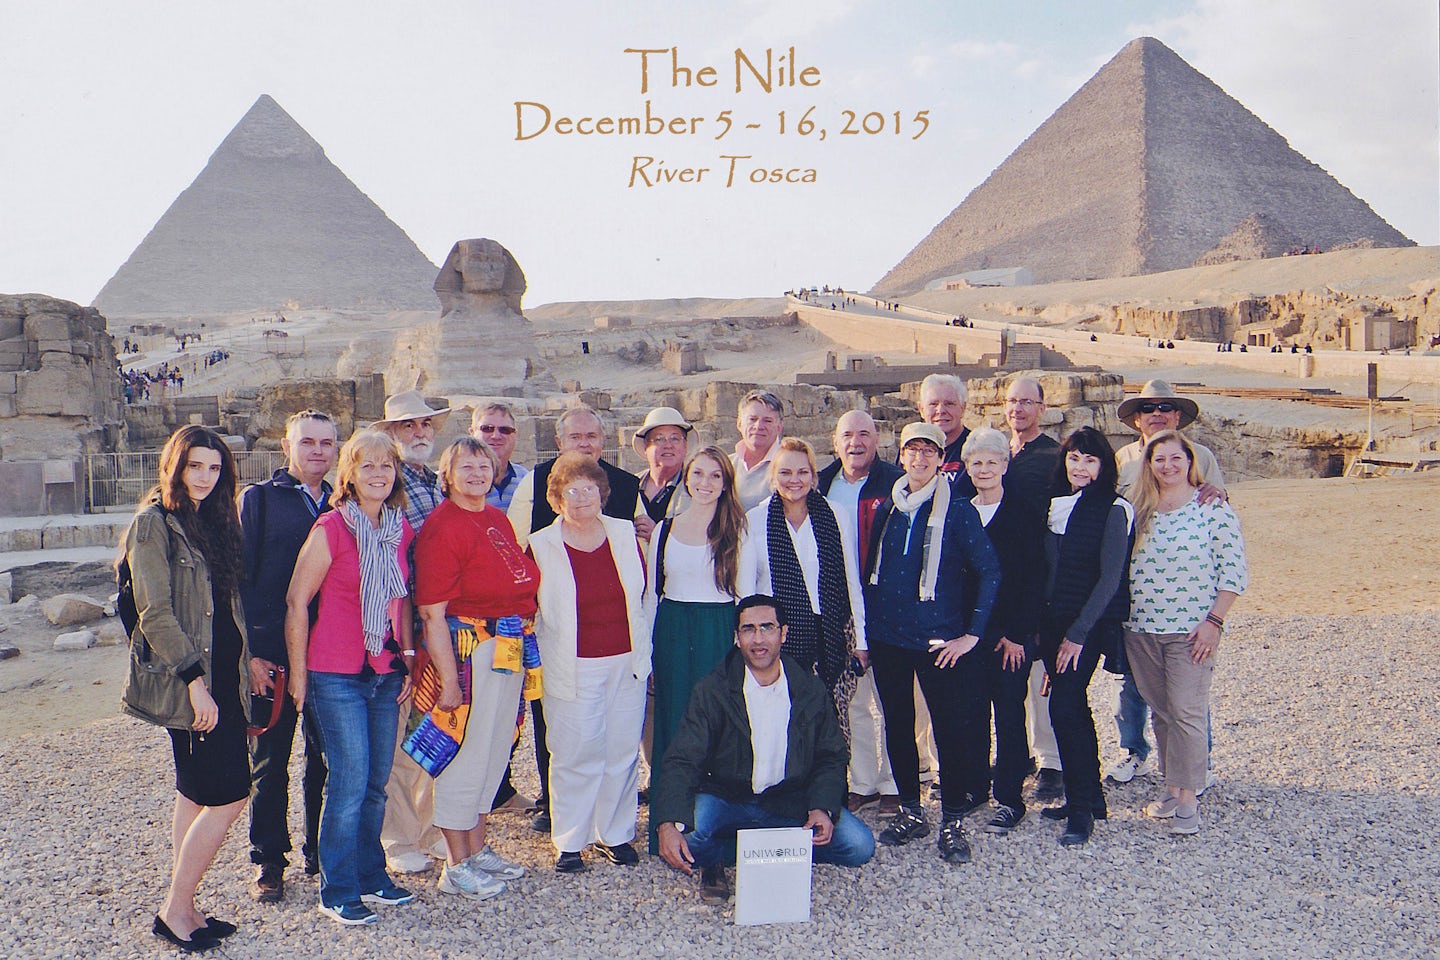 Group shot with Sphinx & pyramids, last day